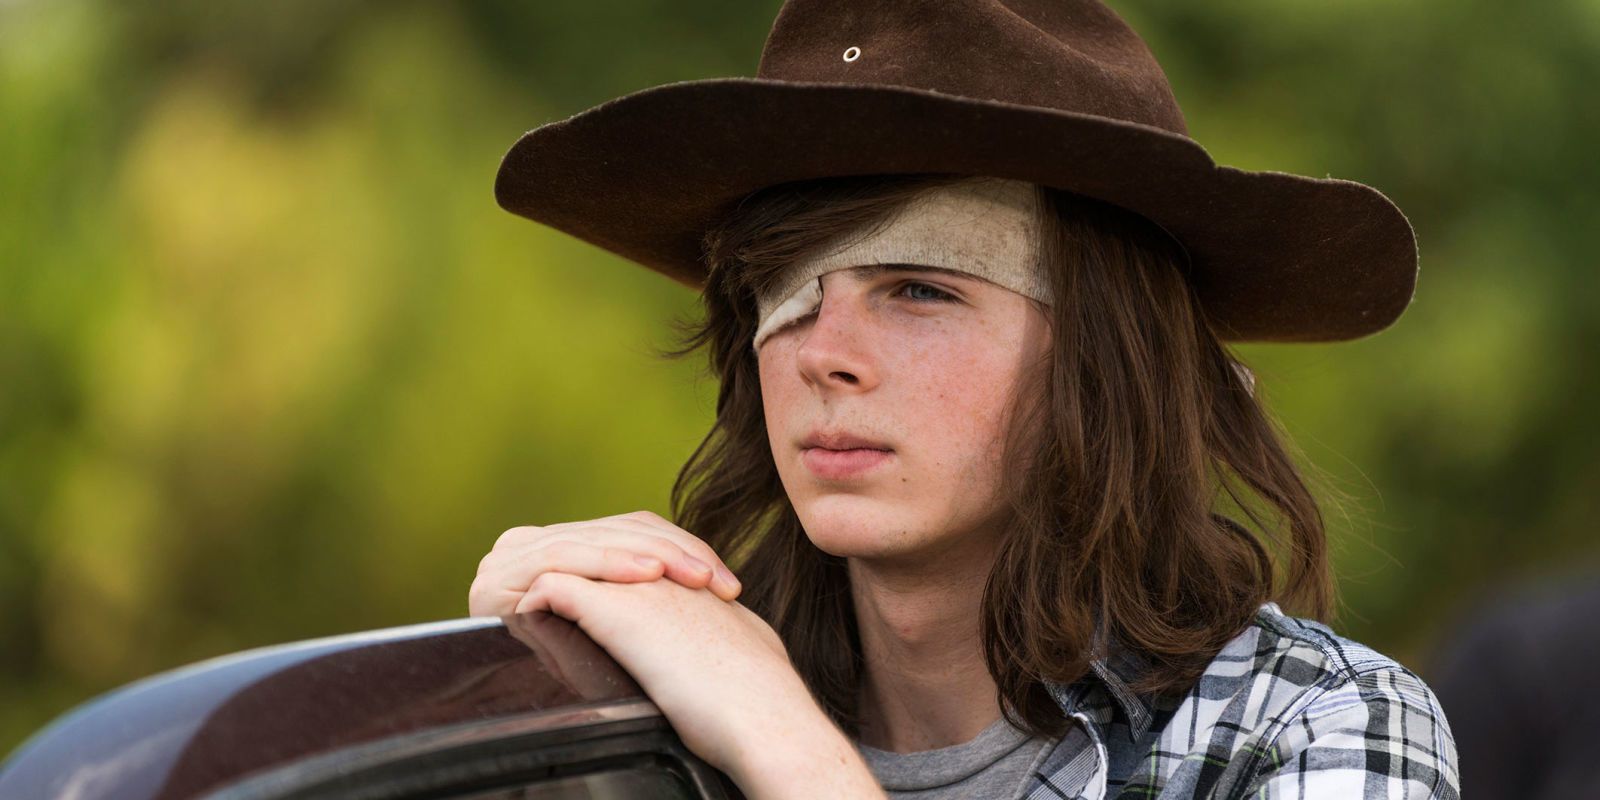 Carl Grimes leans on the door of a car while wearing an eyepatch and hat on The Walking Dead